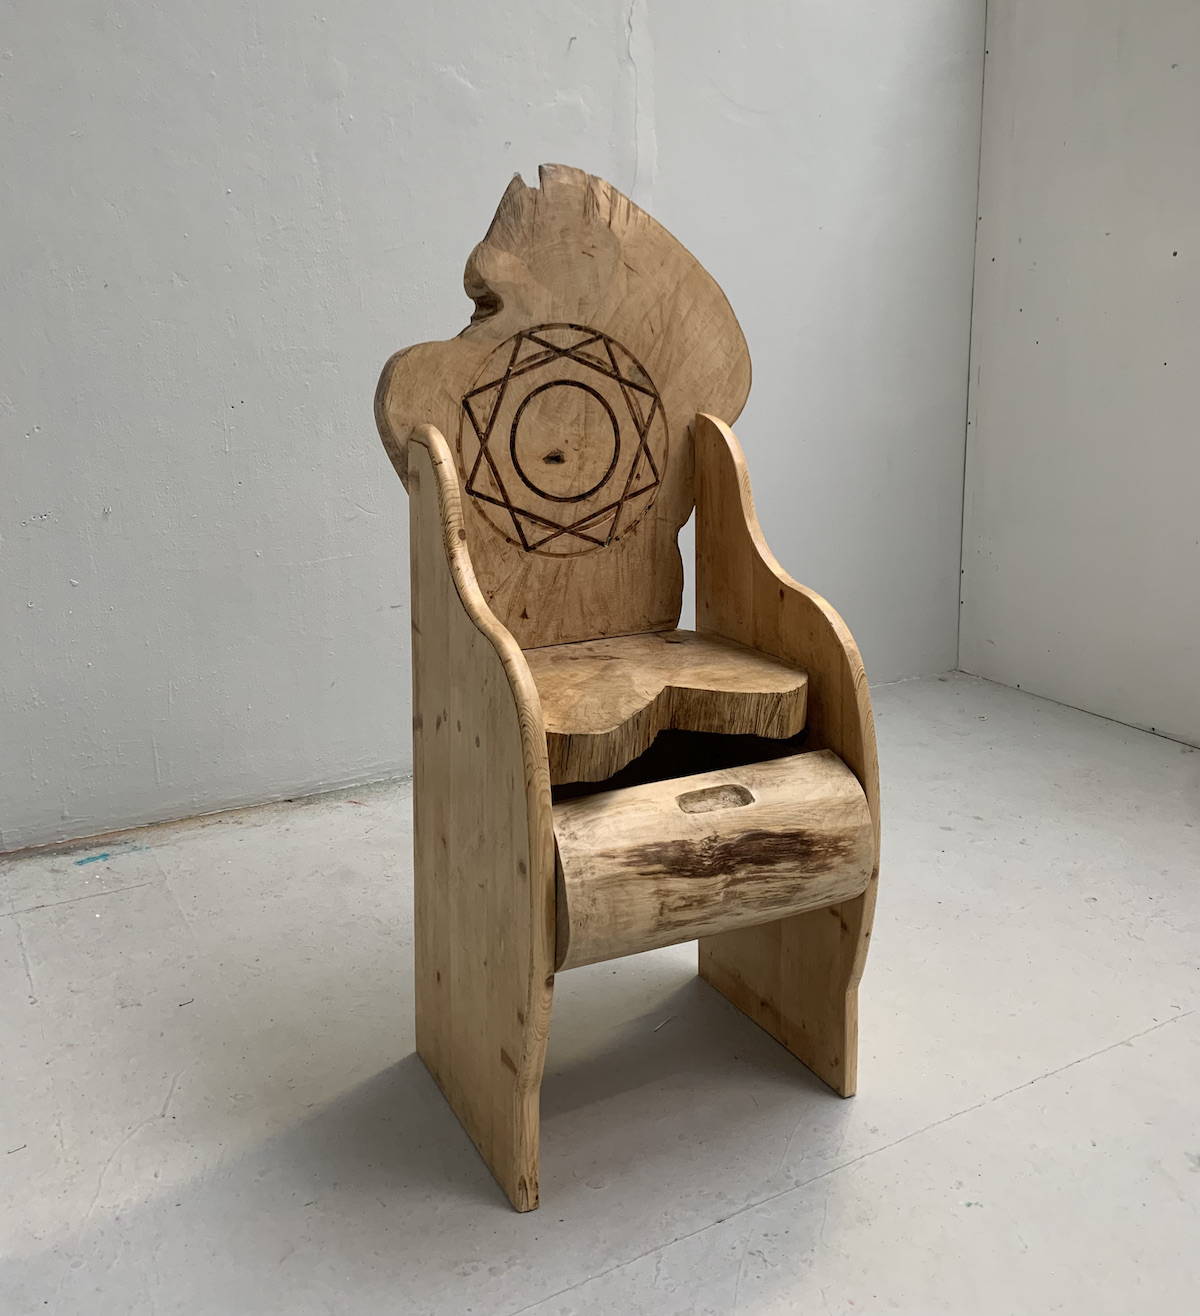 A wooden throne with a 9-sided star carved into its headrest.